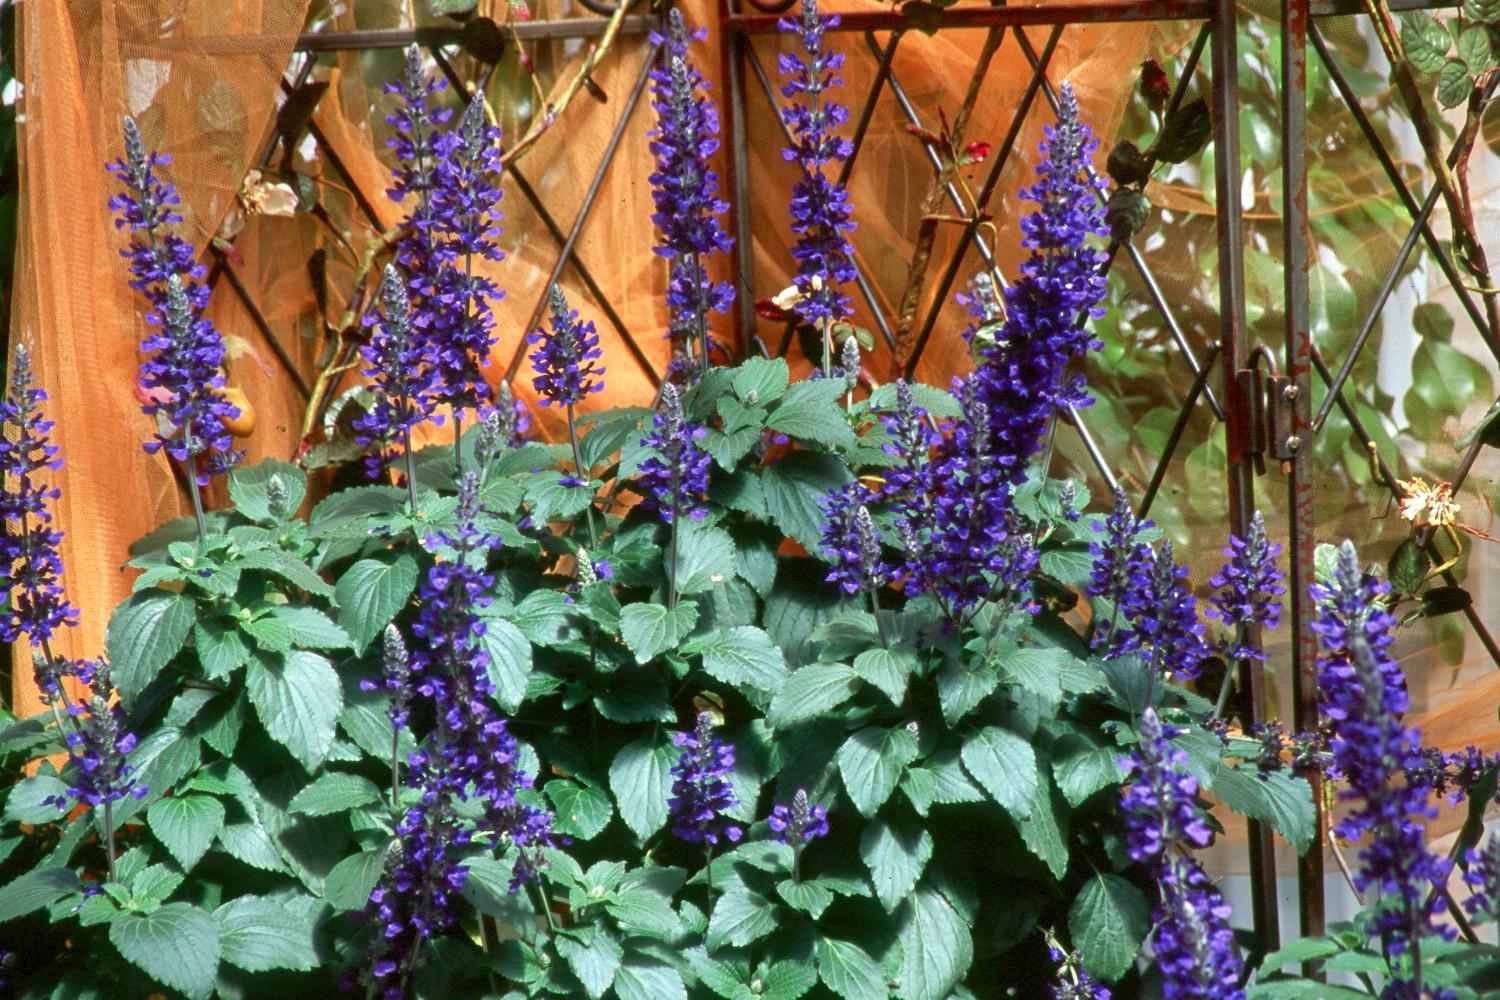 Mystic Spires Blue is the first dwarf or compact selection of the well-loved Indigo Spires. It will work well with perennials like purple coneflowers and summer phlox, or combined with yellows like melampodium, black-eyed Susans and New Gold lantana. 